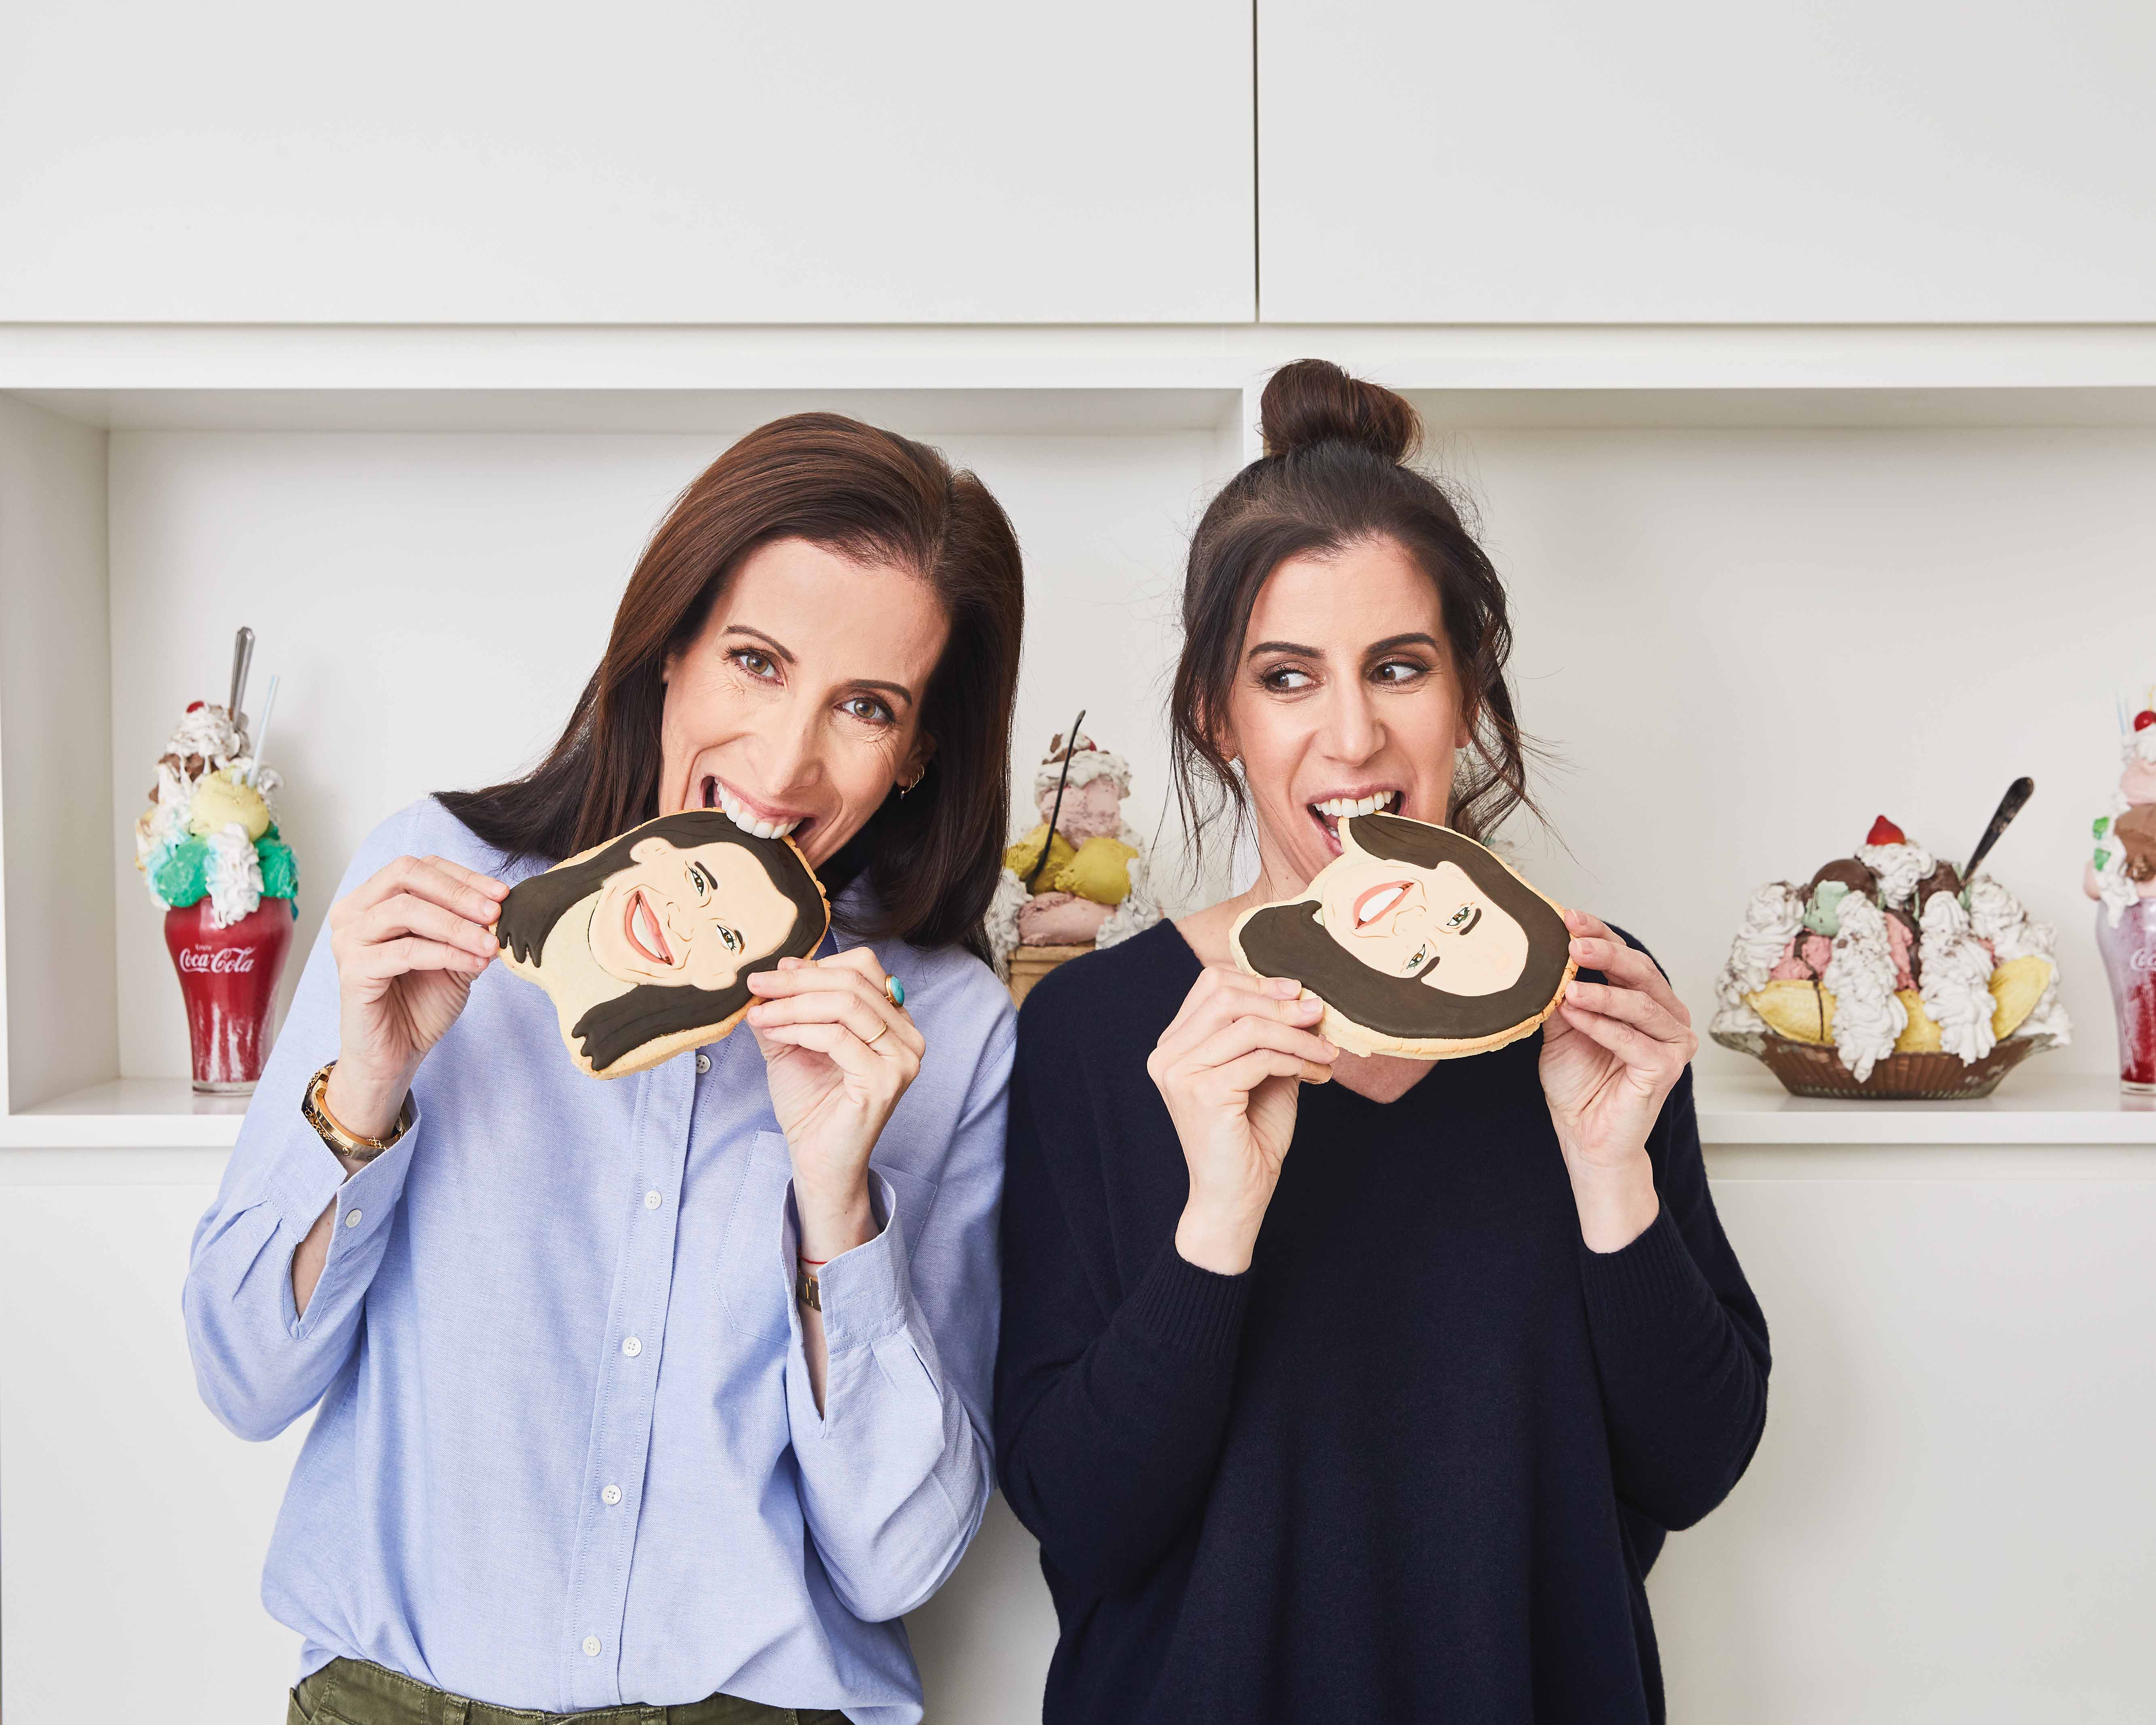 Julie and Lisa biting on cookies with their faces on them